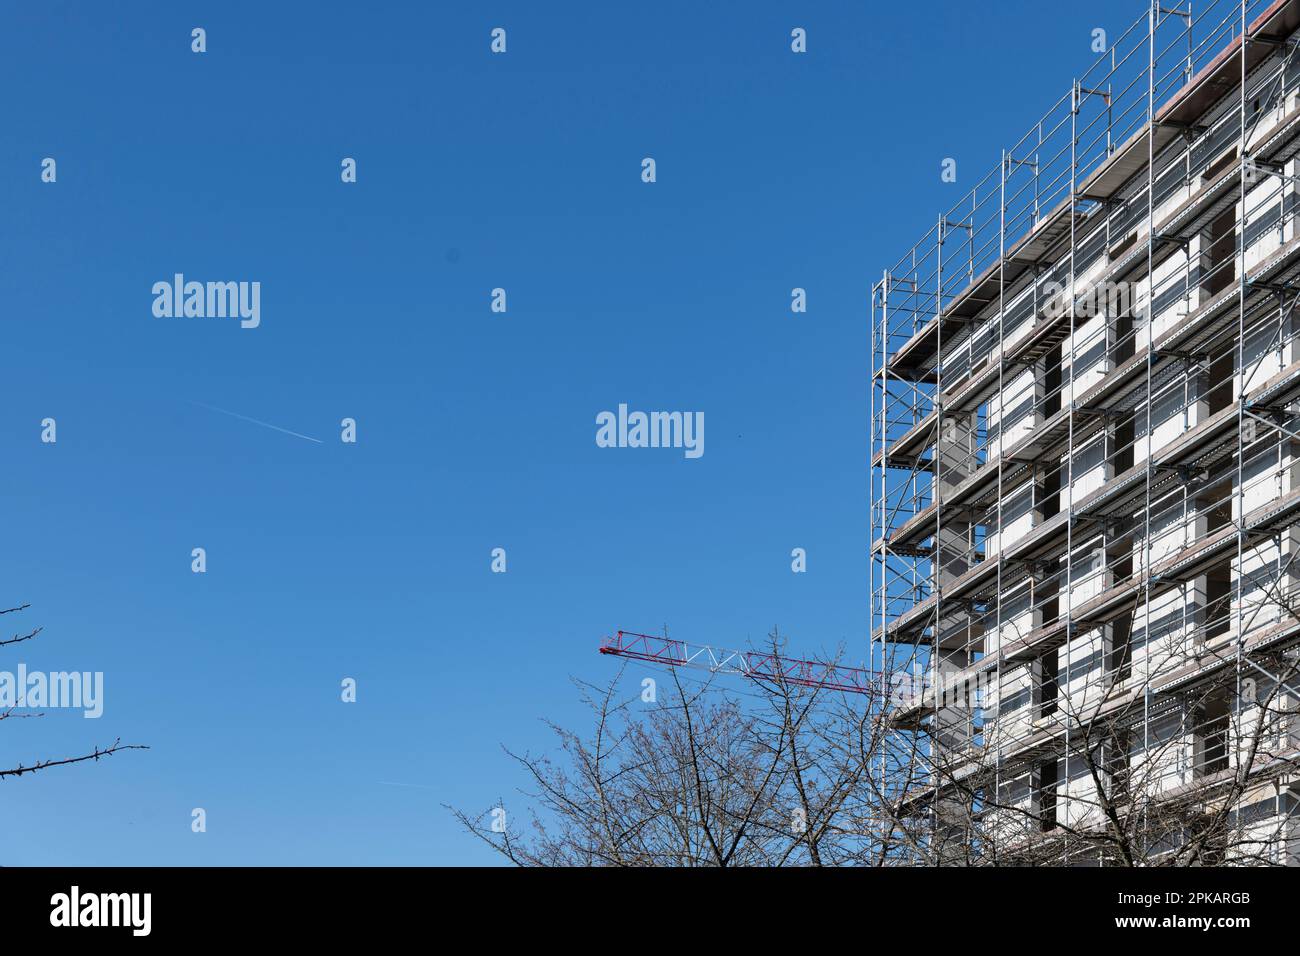 Multistory scaffolded building in shell against bright blue sky Stock Photo